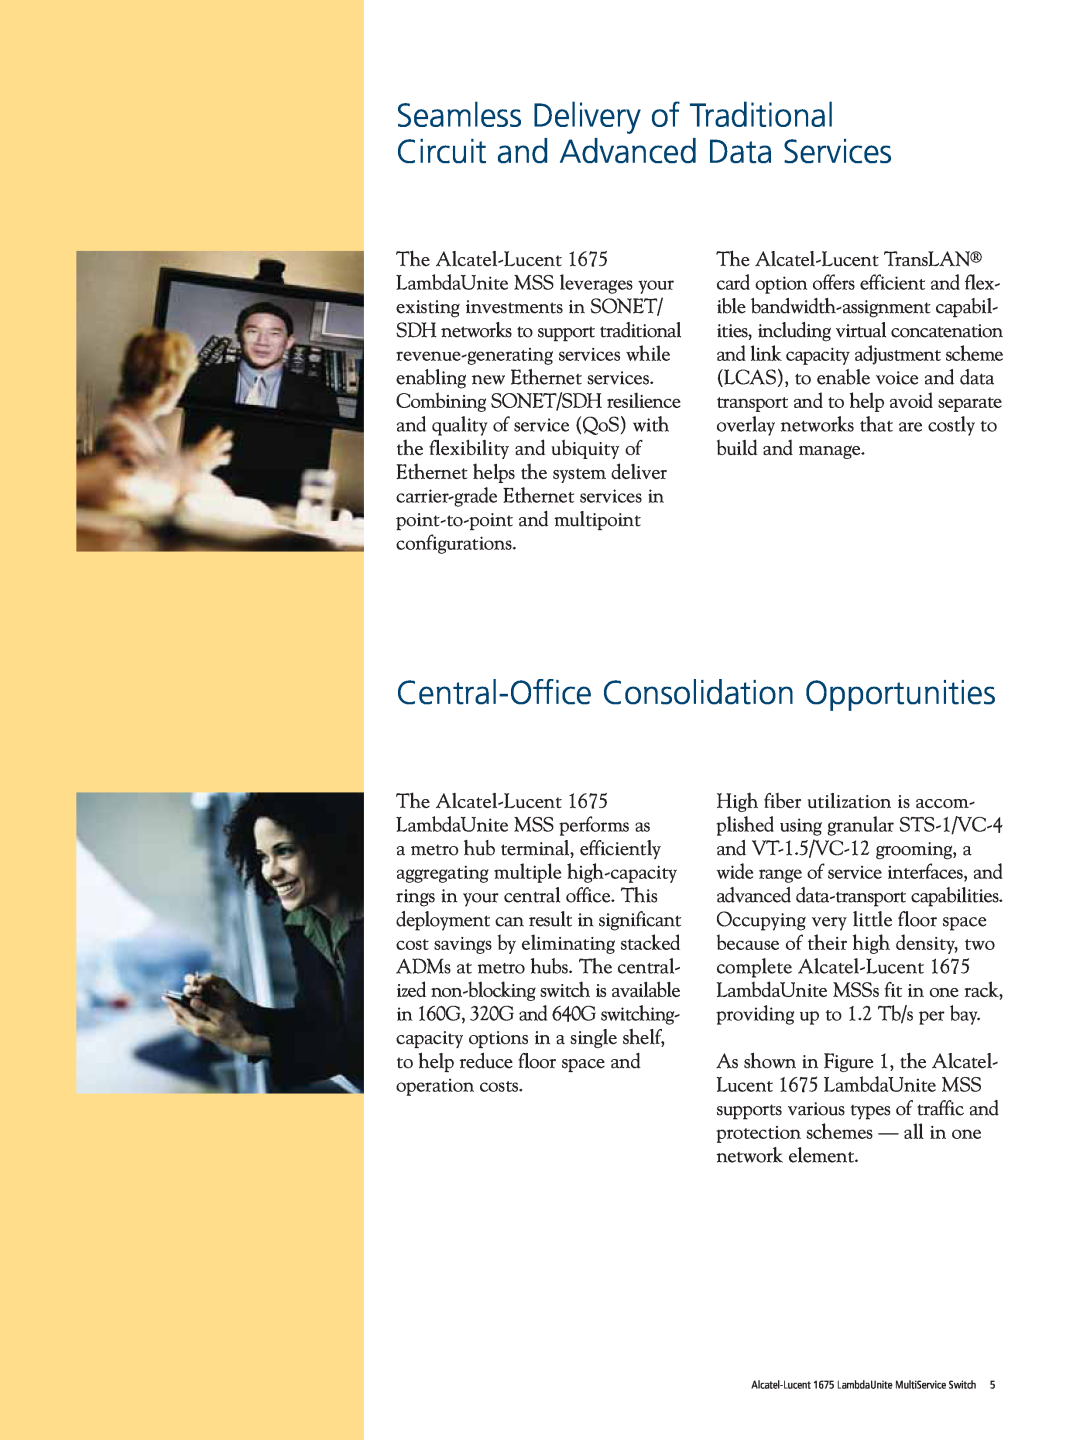 Alcatel-Lucent 1675 manual Central-Office Consolidation Opportunities 